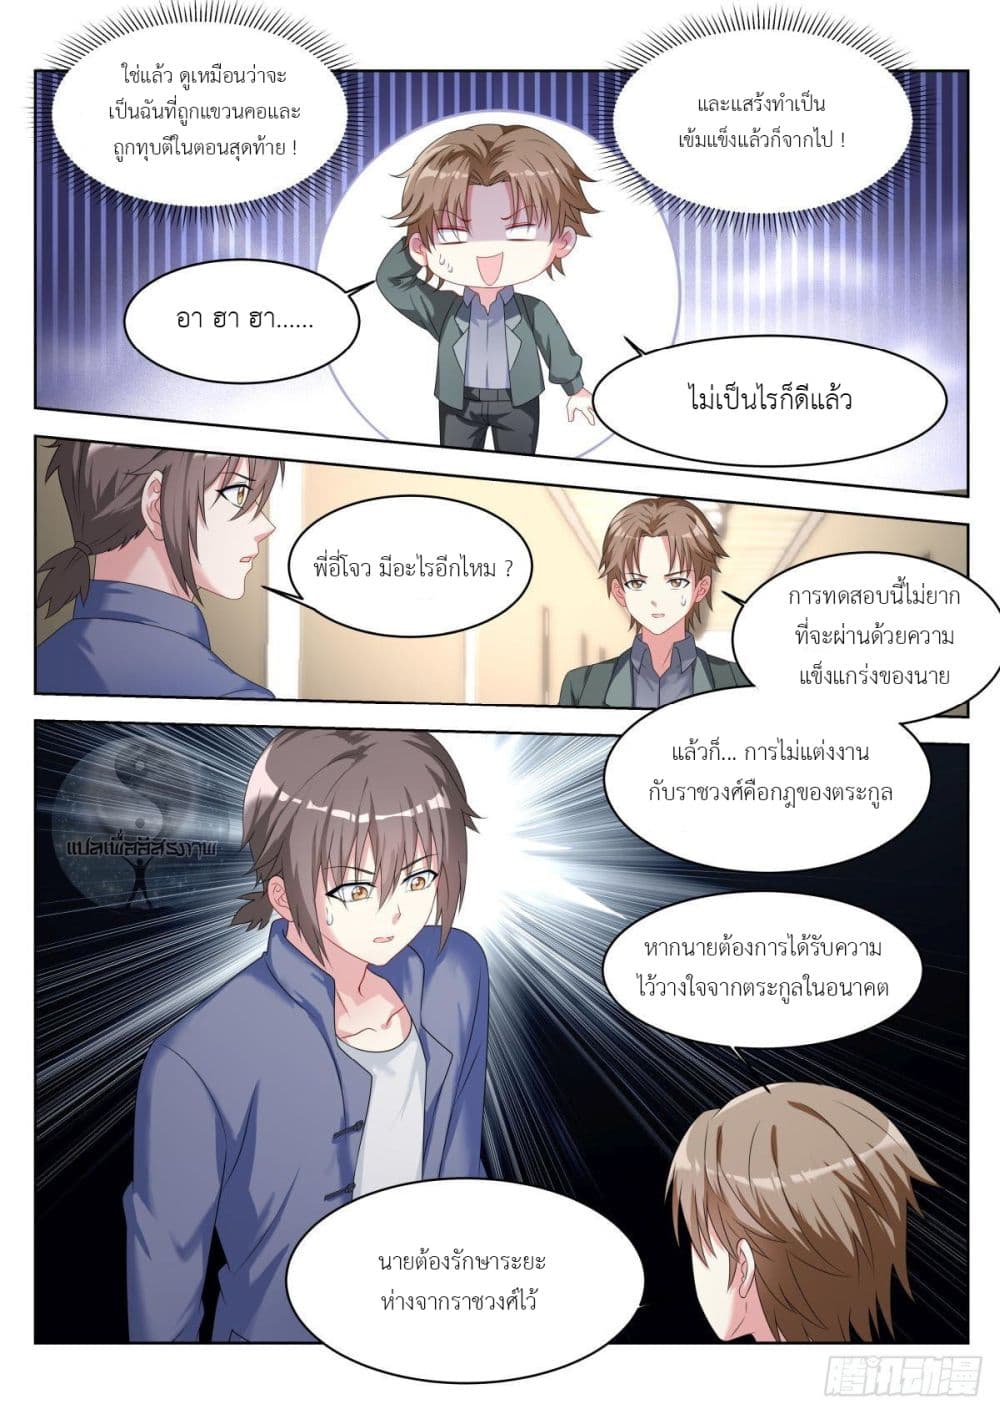 Miss, Something's Wrong With You สาวน้อยคุณคิดผิดแล้ว 26-26